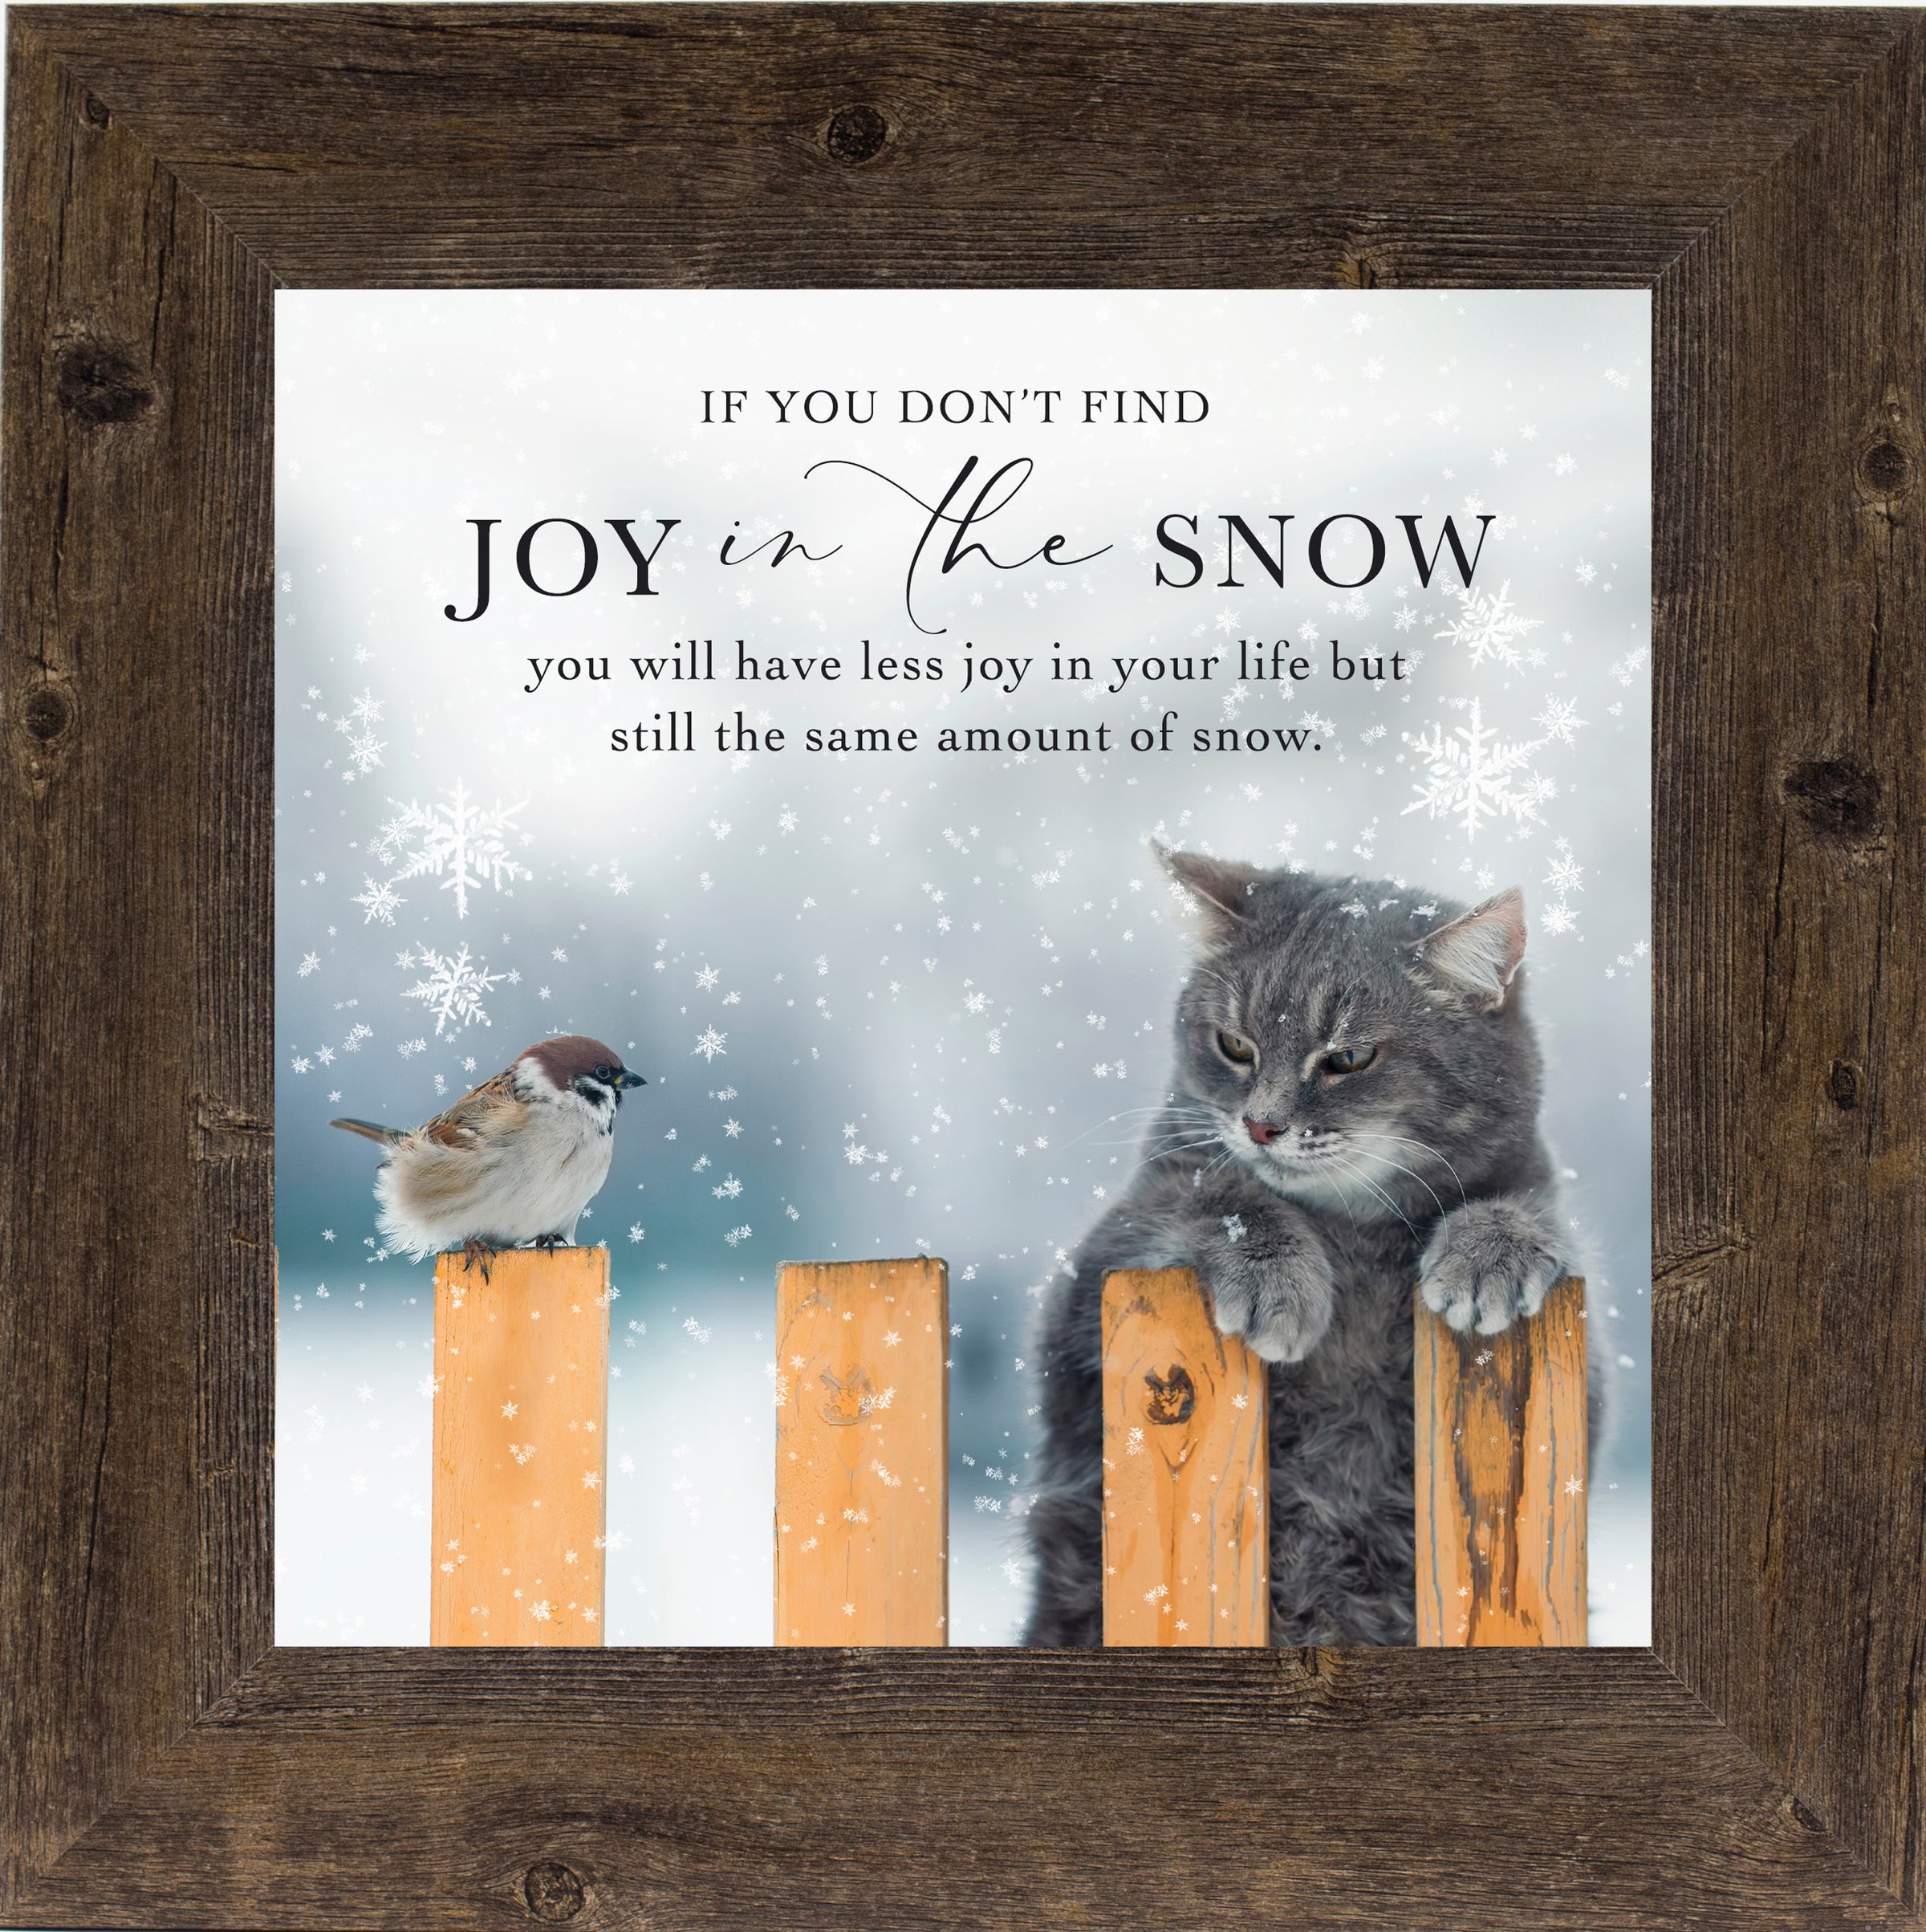 Joy in the Snow by Summer Snow SN45